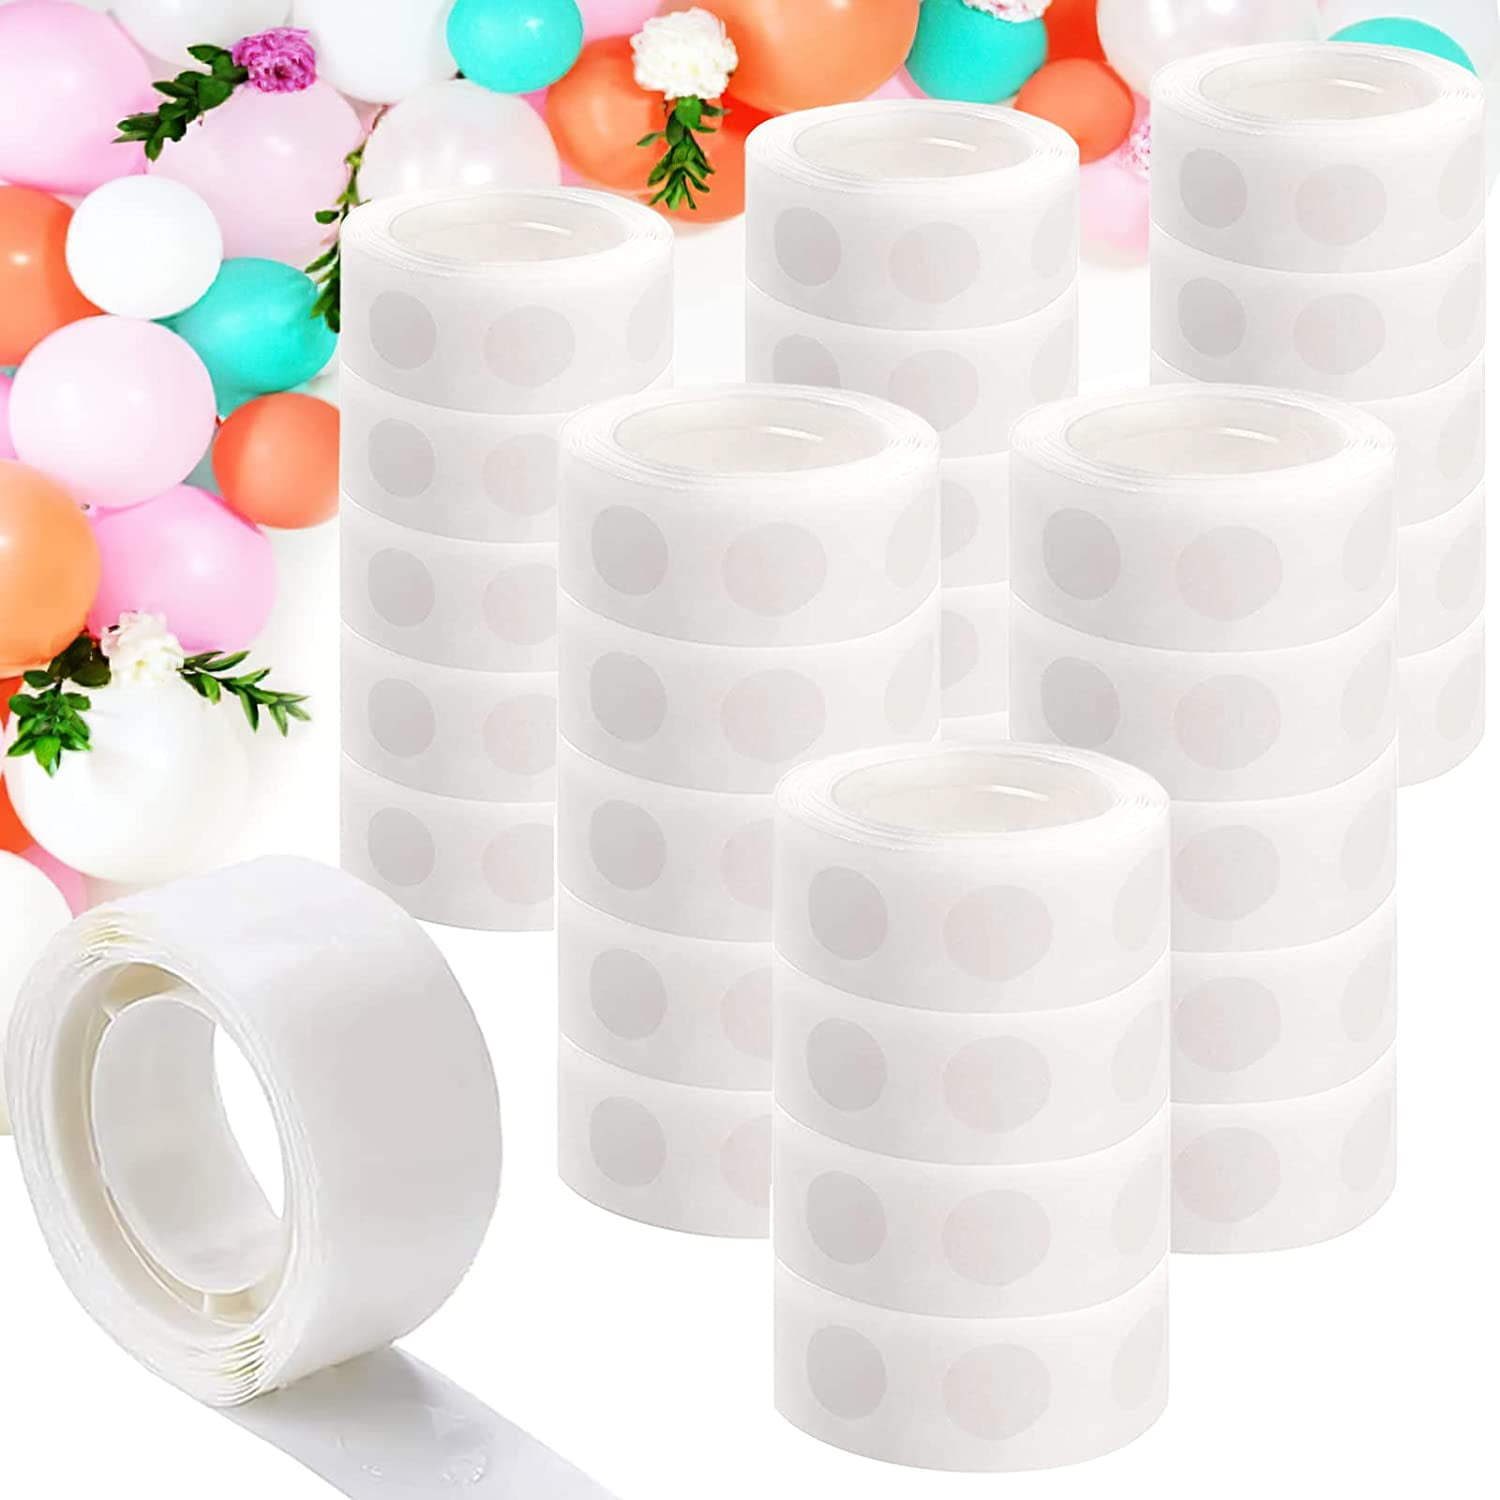  SEWACC 60 Rolls Double-Sided Dispensing Dot Balloons Double  Sided Balloon Tape Dot Balloon Tape Strip Sticky Balloon Sticker Balloon  Tapes Soft Acrylic Balloon Glue White Round : Office Products